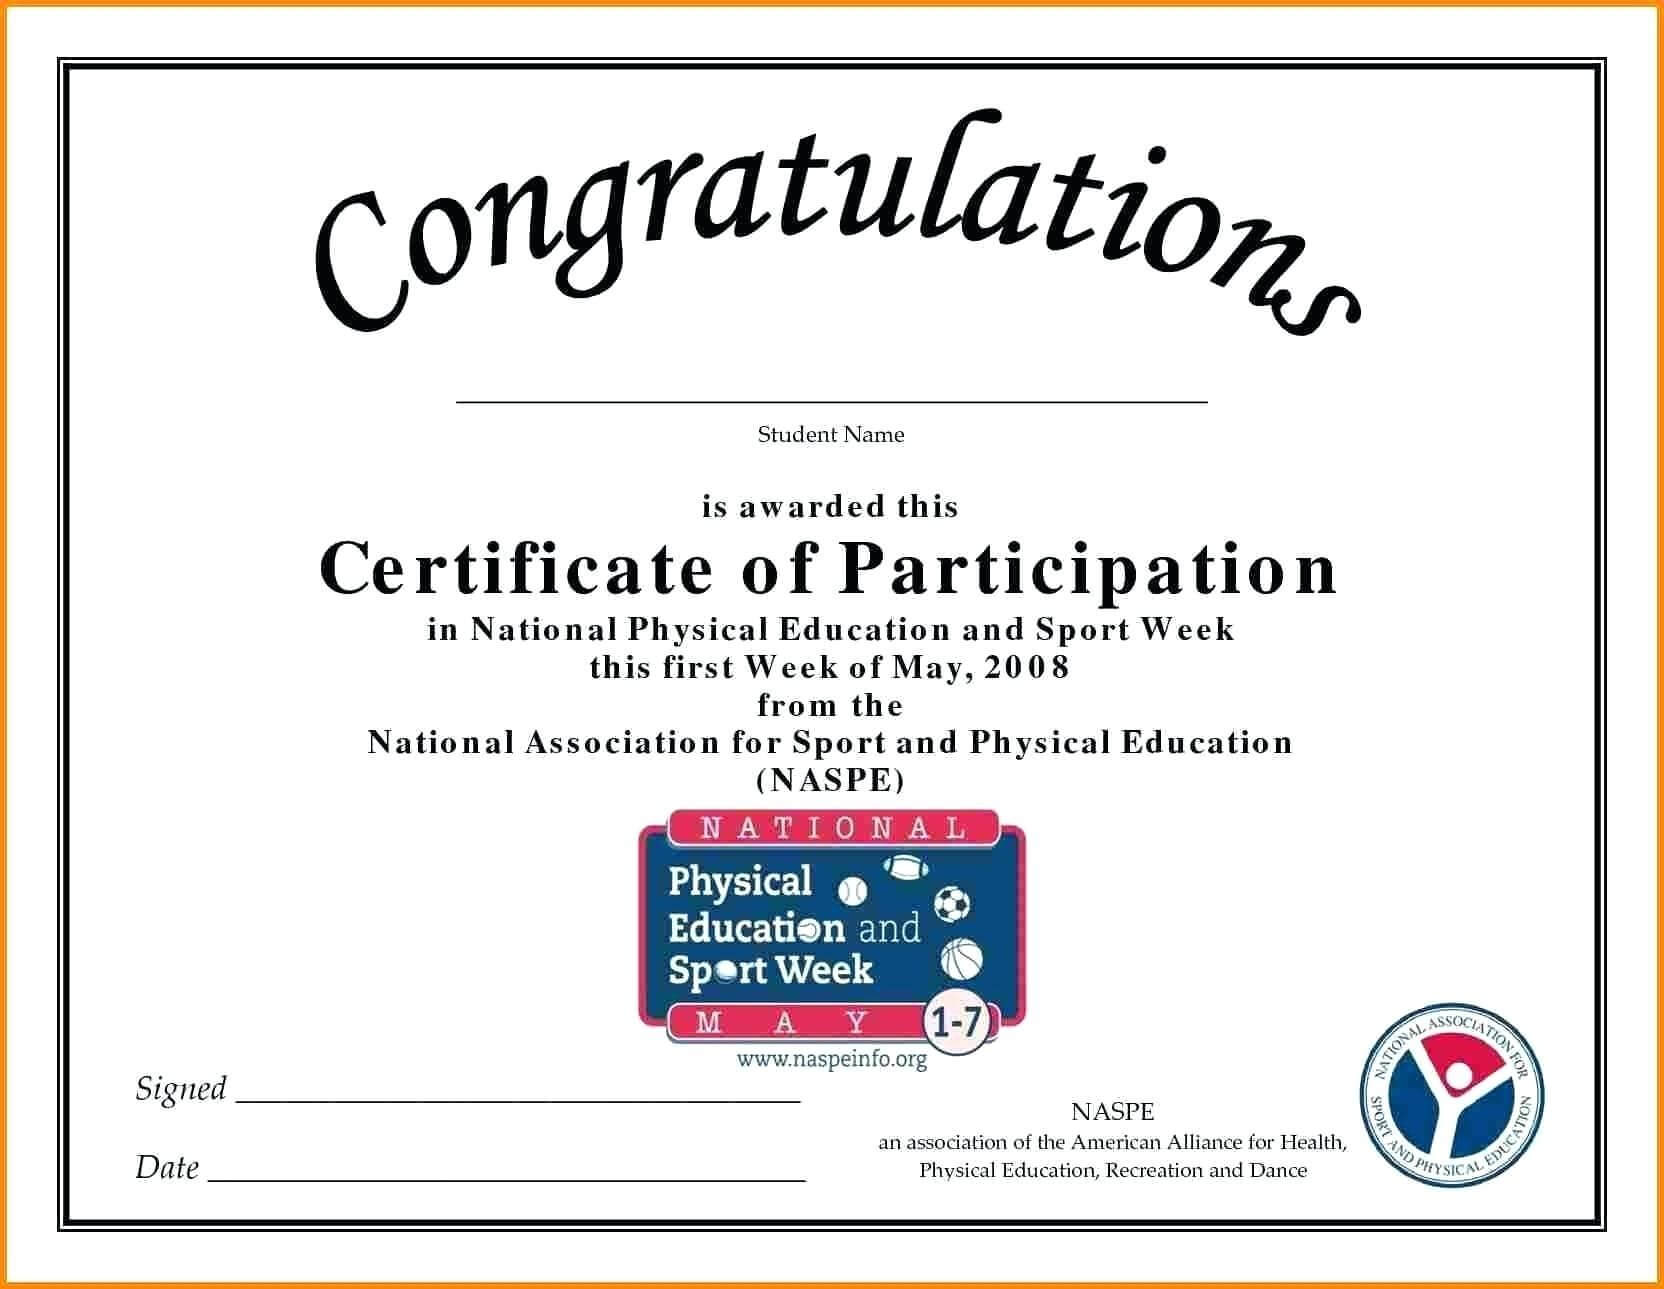 🥰free Printable Certificate Of Participation Templates (Cop)🥰 With Conference Participation Certificate Template